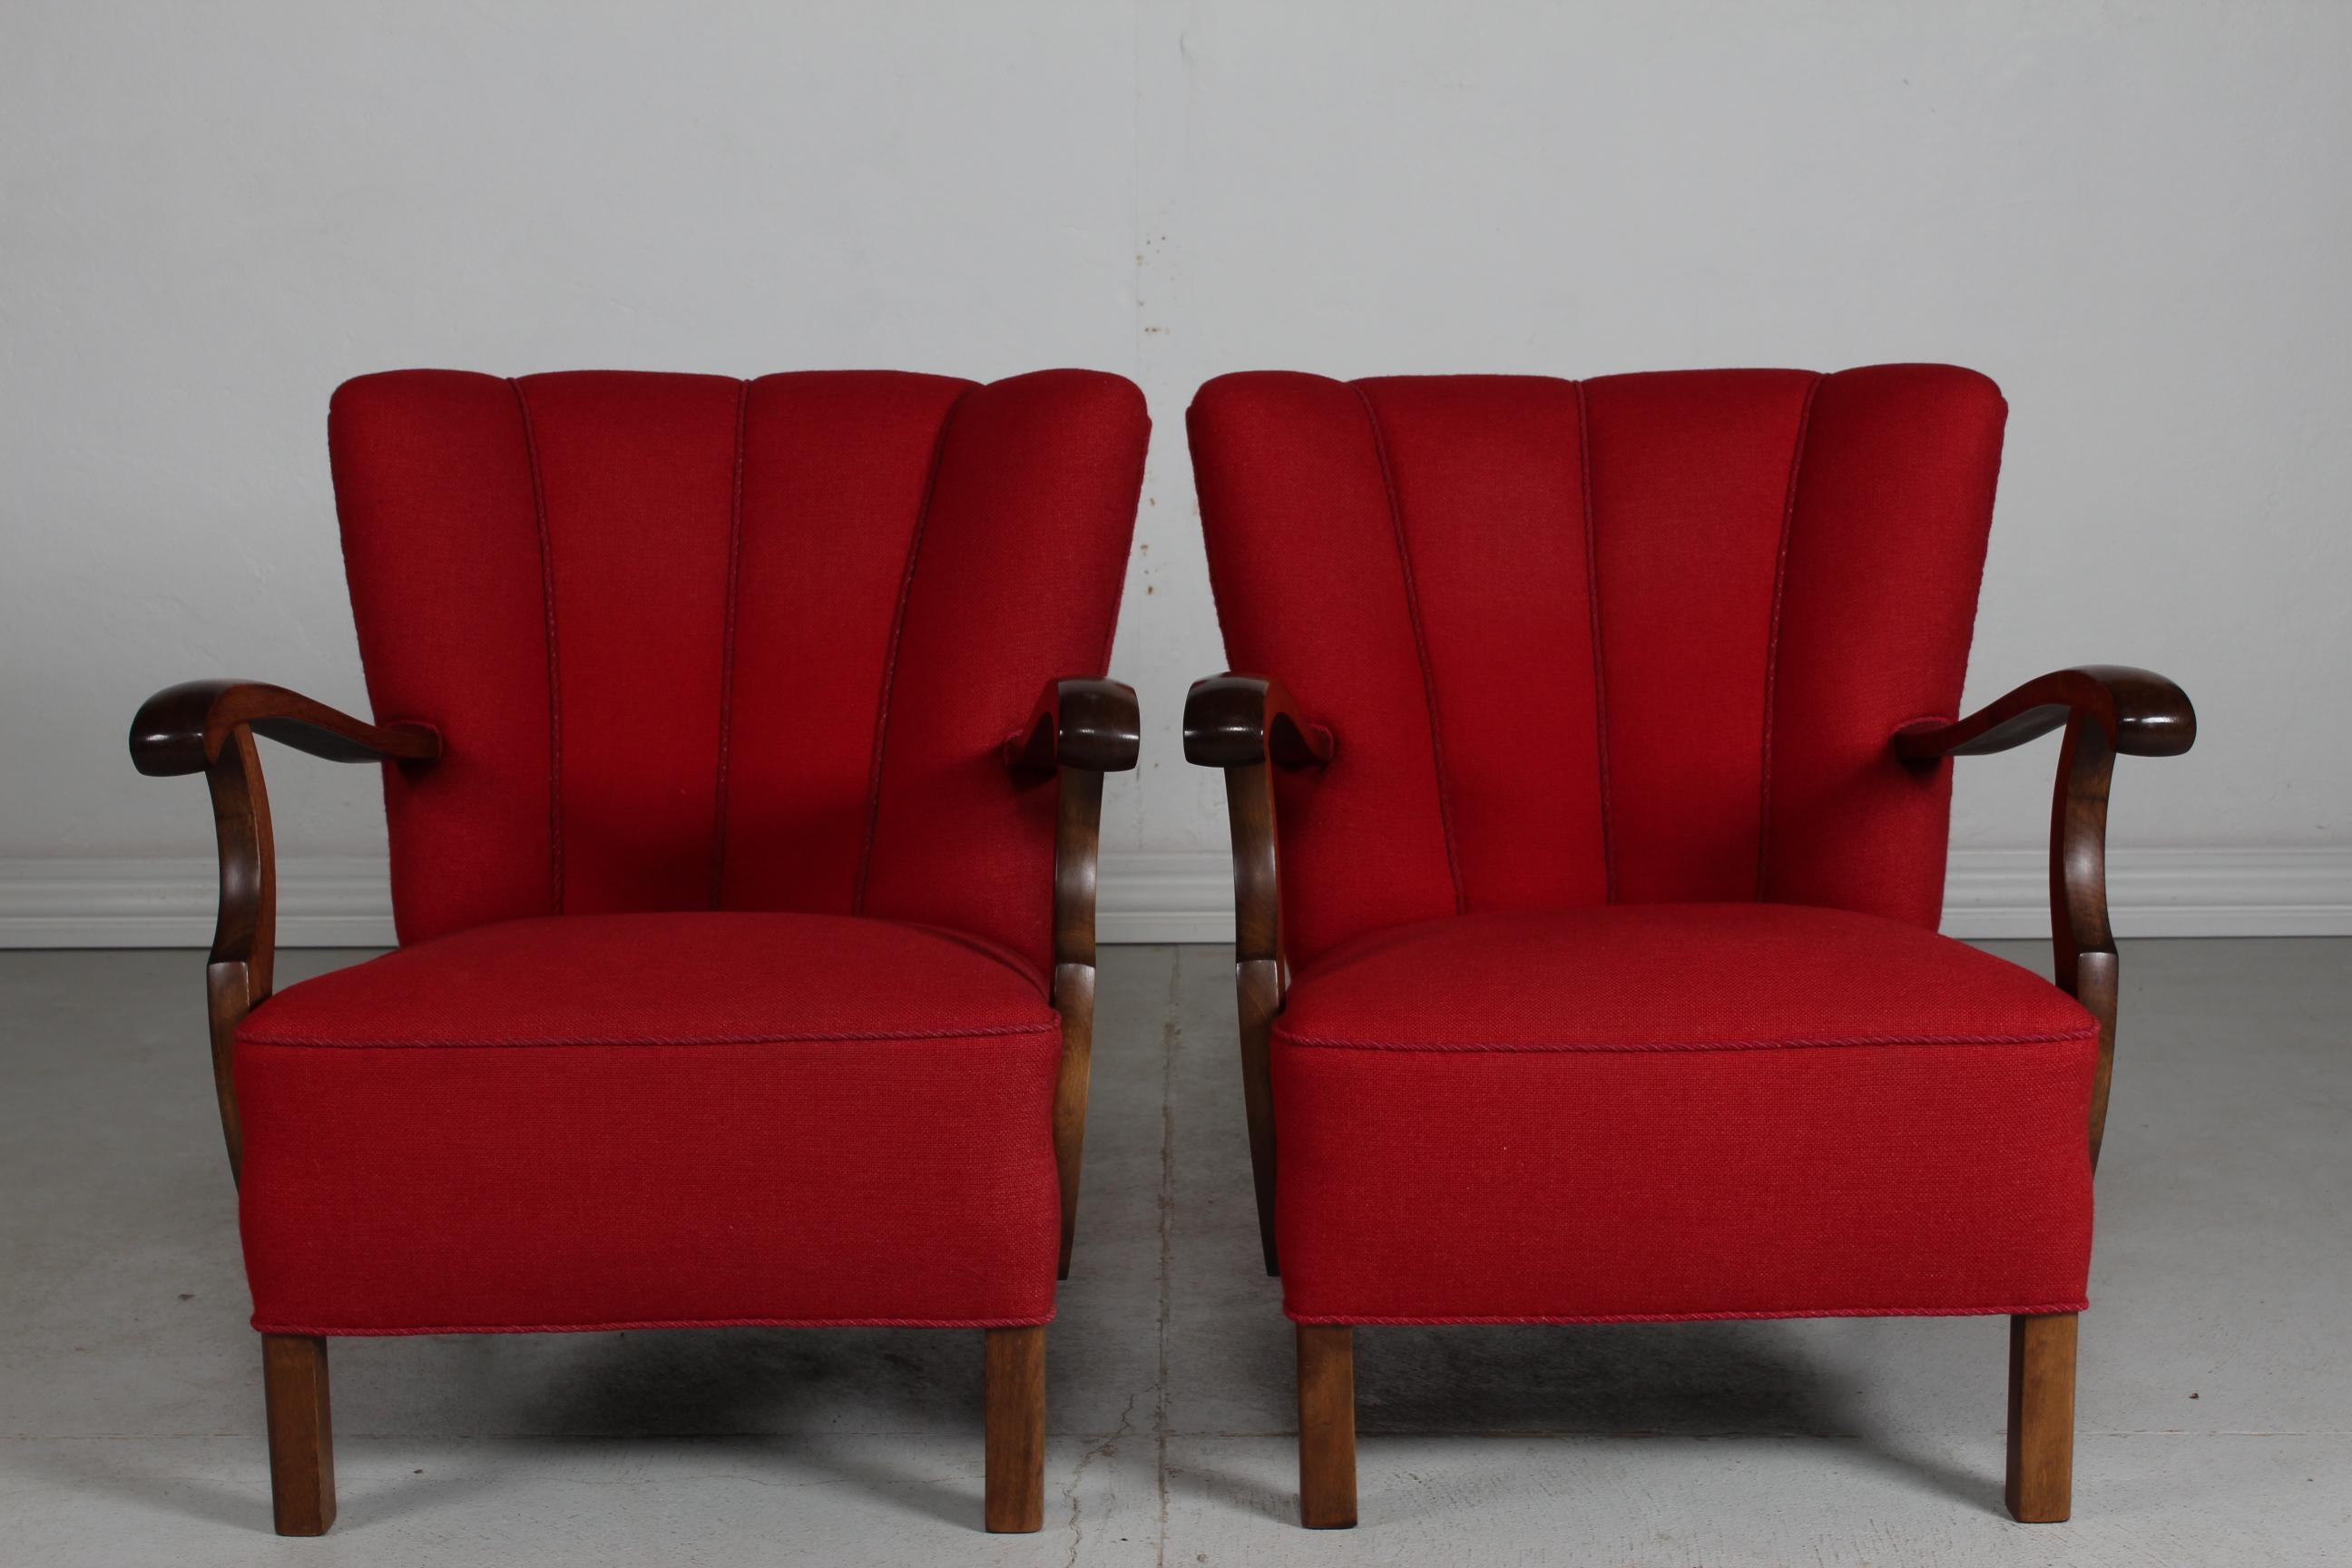 Here is a pair of Art Deco easy- and lounge chairs in Viggo Boesen style from the 1930-1940's. 
They are made with wavy back of dark stained beech upholstered with red hallingdal wool.
Made by a Danish furniture maker, possibly manufactured at